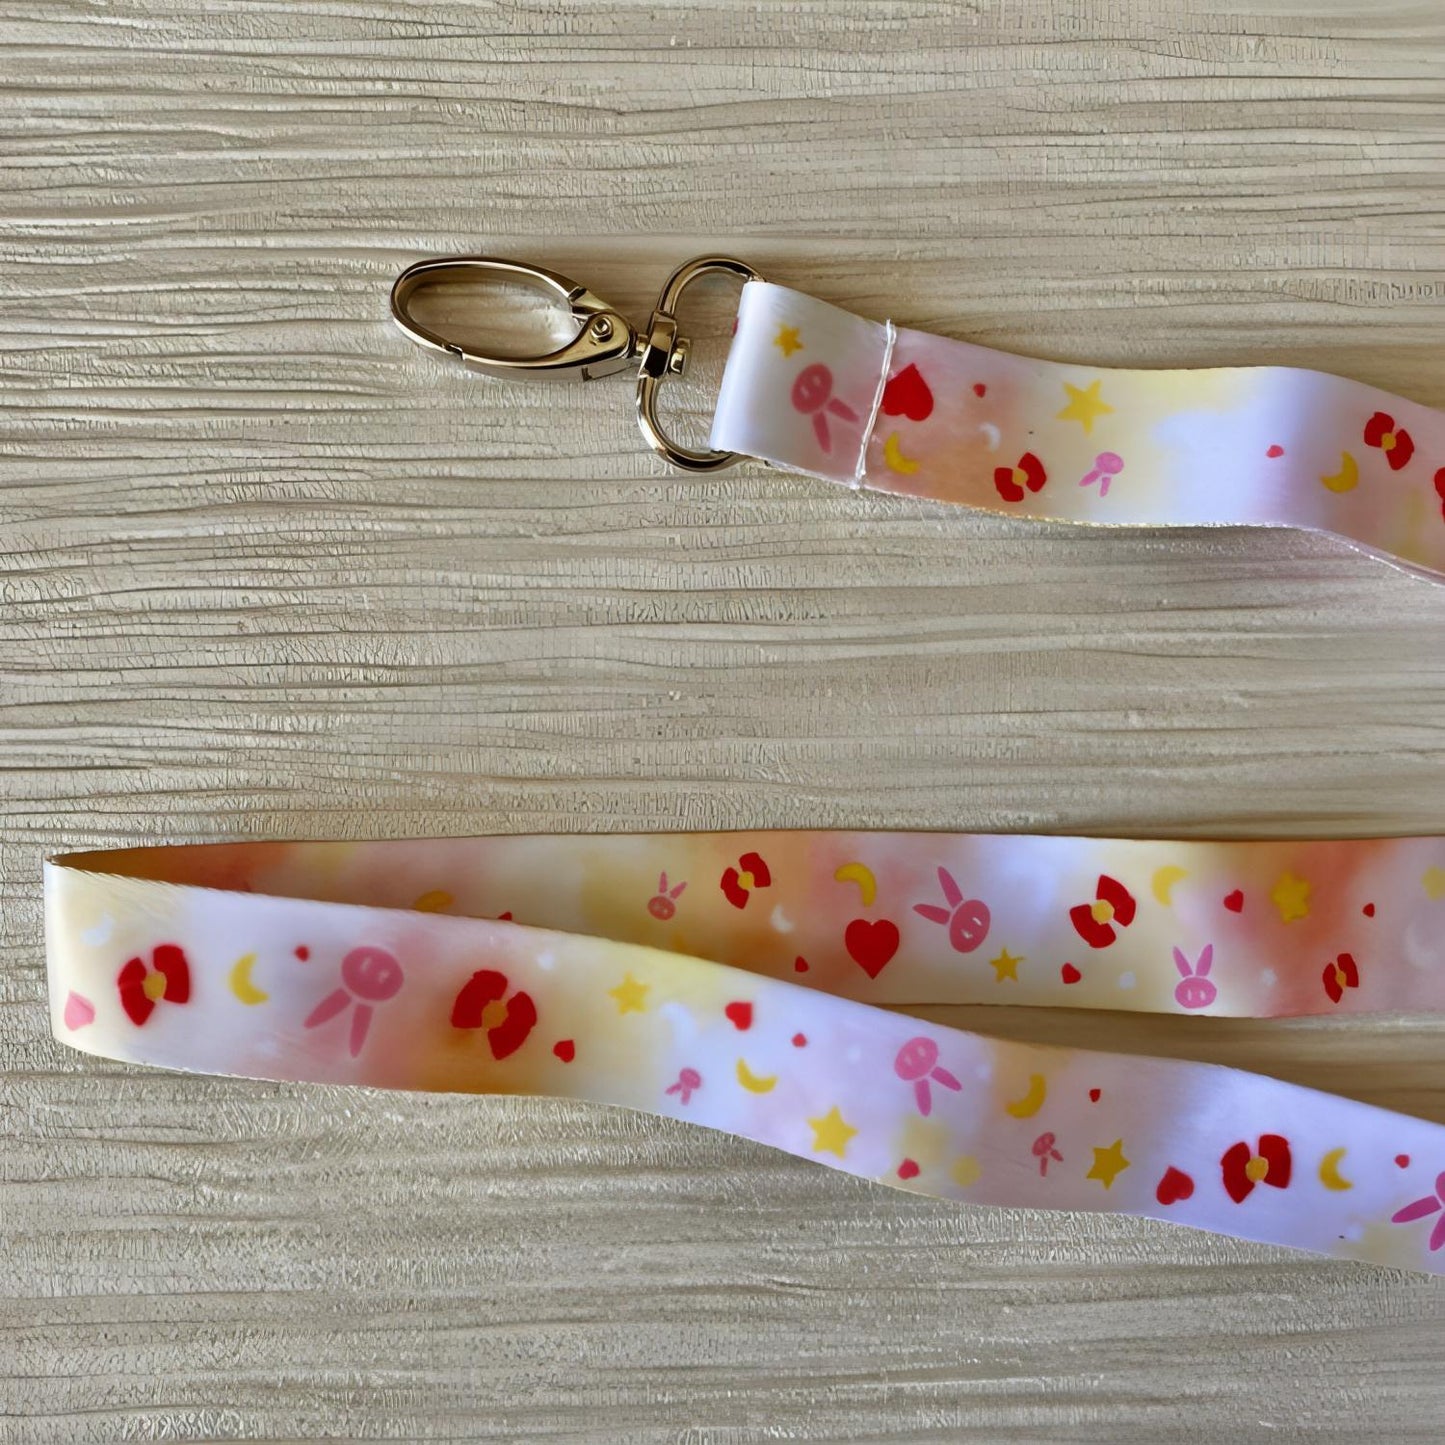 THe image shows the lanyard from a top-down angle. This shows the pattern more clearly; each symbol is small (around 2mm wide) and they are interspersed with each other up and down the lanyard. The image also shows the metal oval hook at the end.